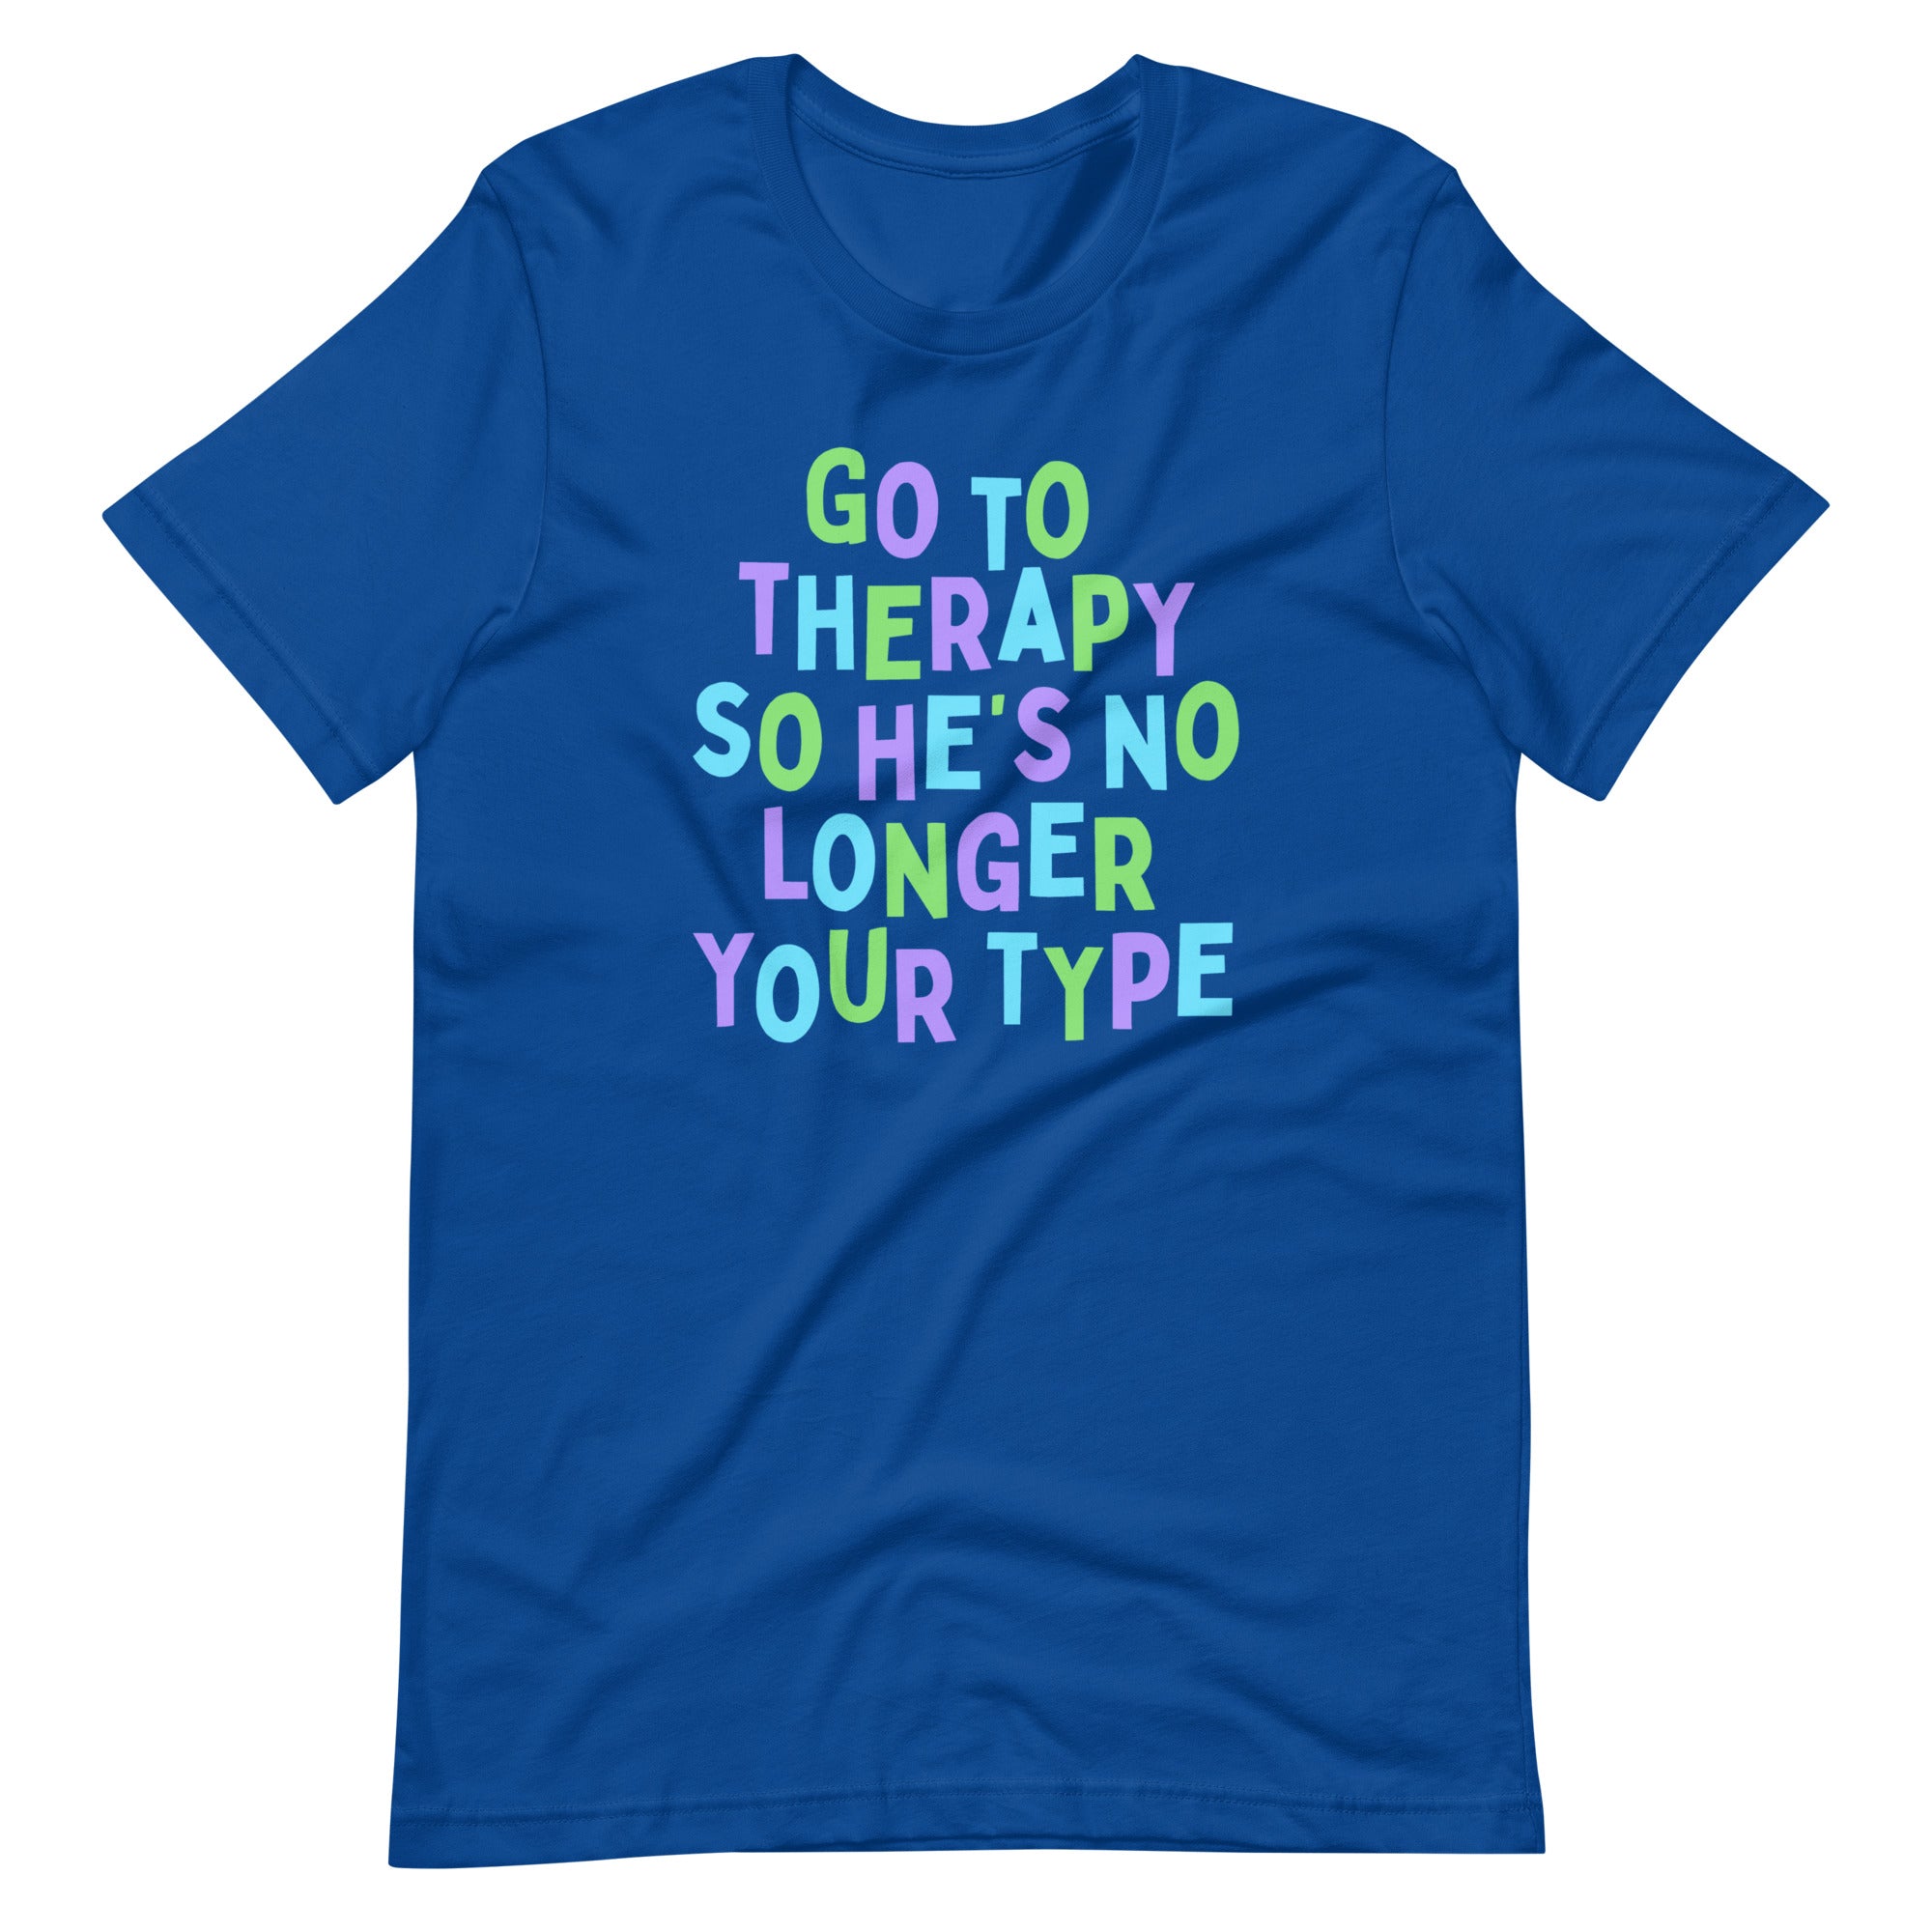 Go To Therapy So He’s No Longer Your Type Unisex Feminist t-shirt - Shop Women’s Rights T-shirts - Feminist Trash Store - True Royal